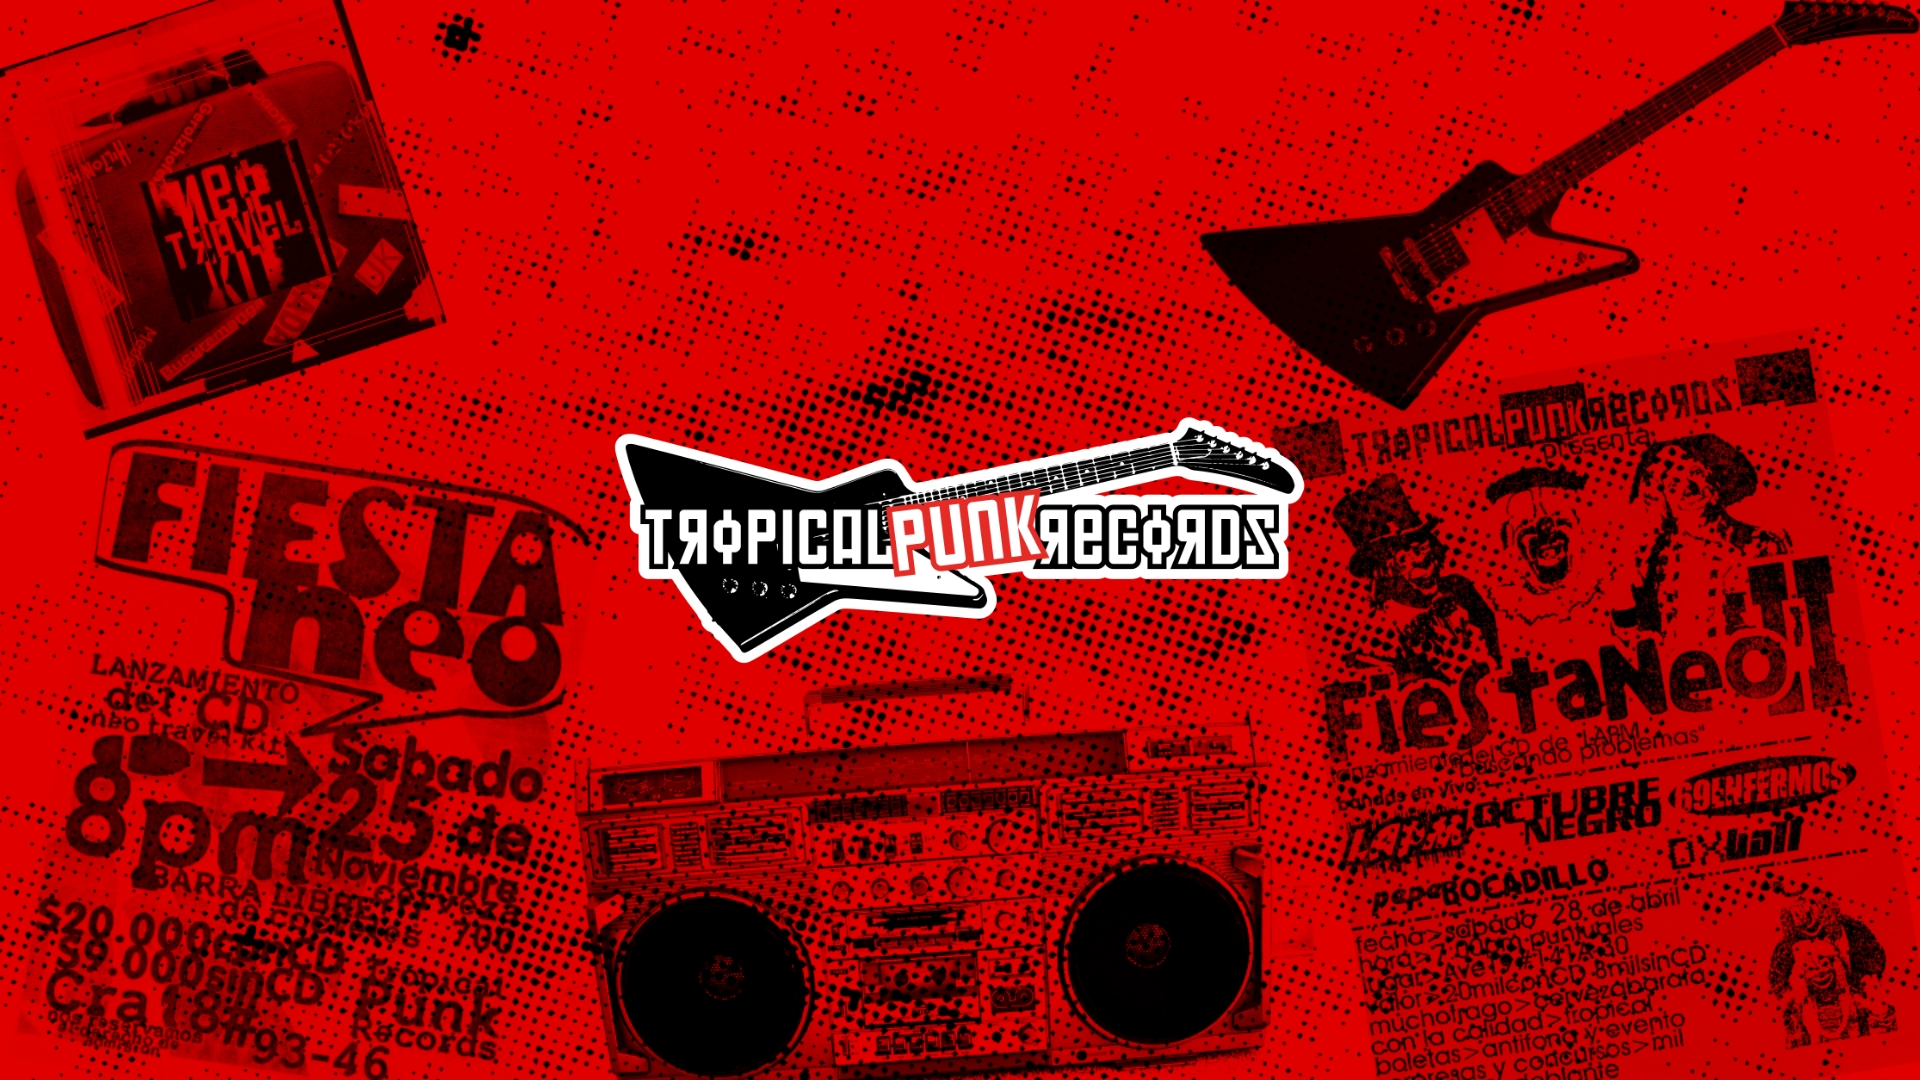 Tropical Punk Records is an independent label based in Colombia that focuses on highlighting punk, ska and hardcore projects from Latin America